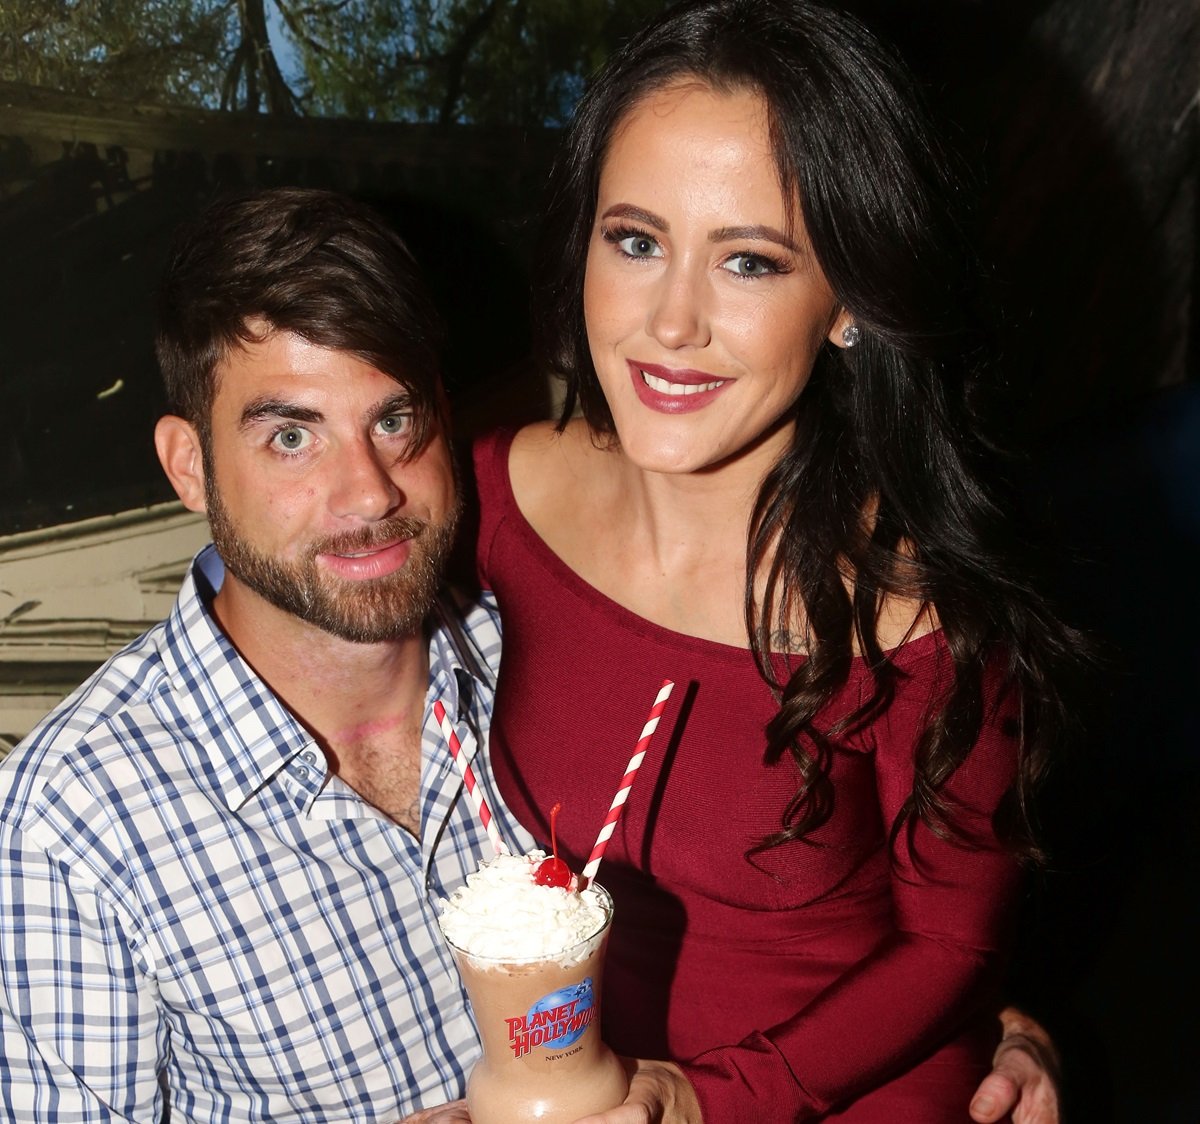 David Eason and Jenelle Evans visit Planet Hollywood Times Square on November 20, 2015 in New York City.